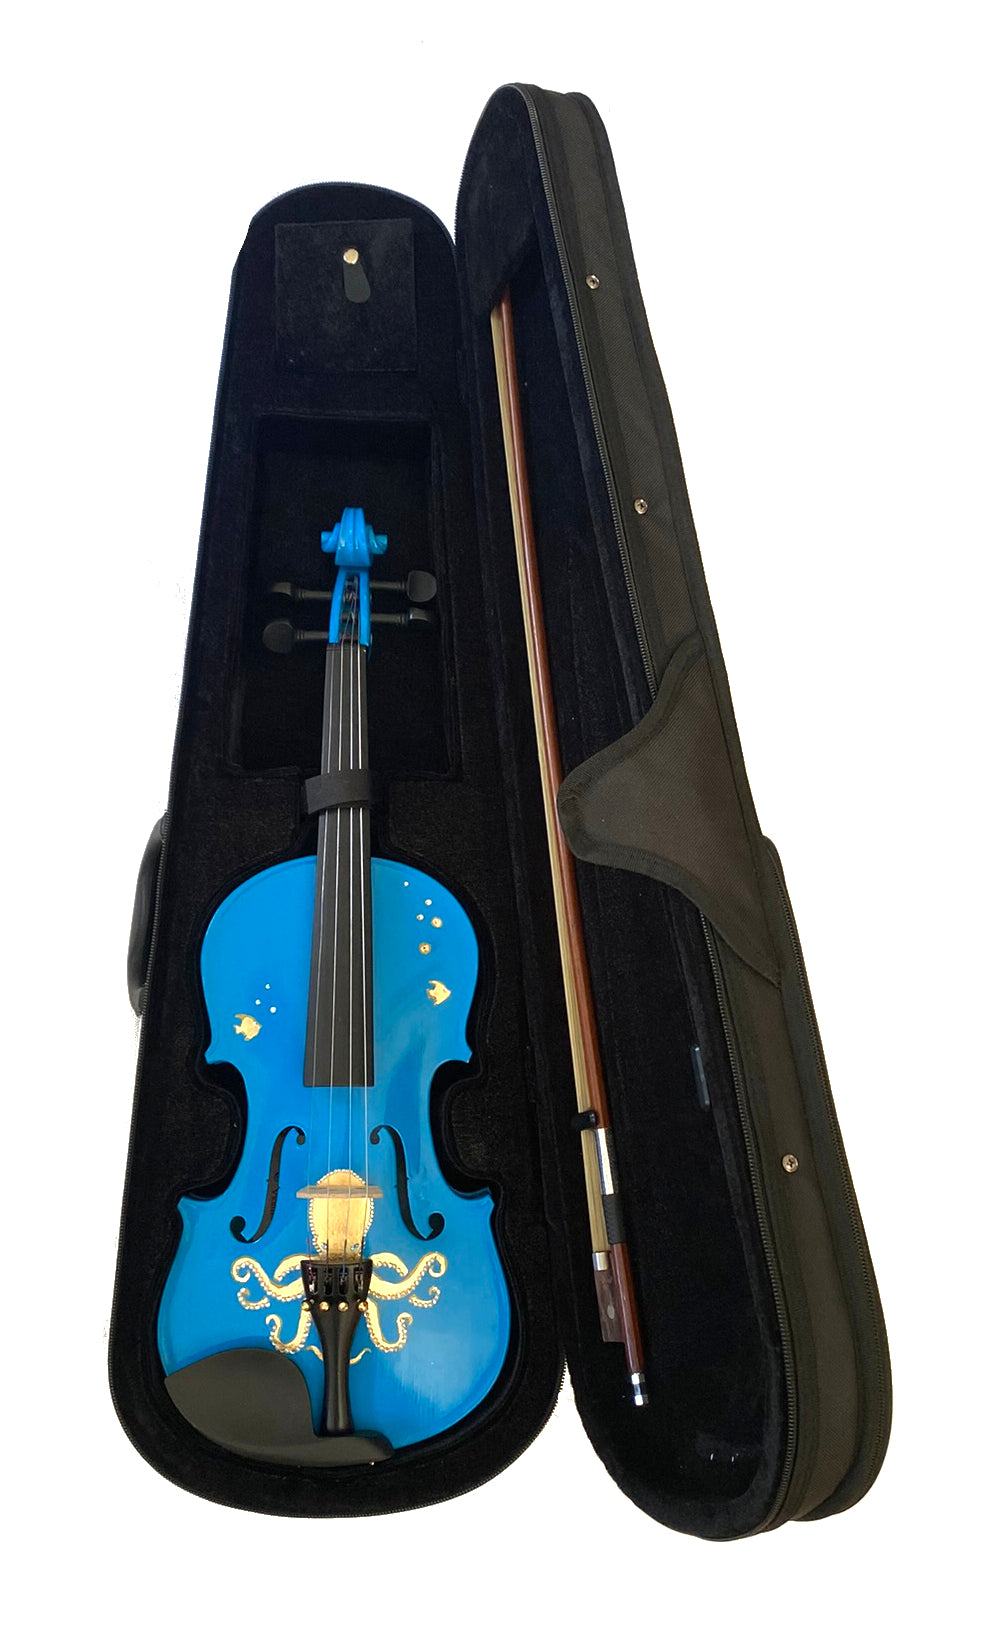 Octopus Bling Blue Violin Outfit